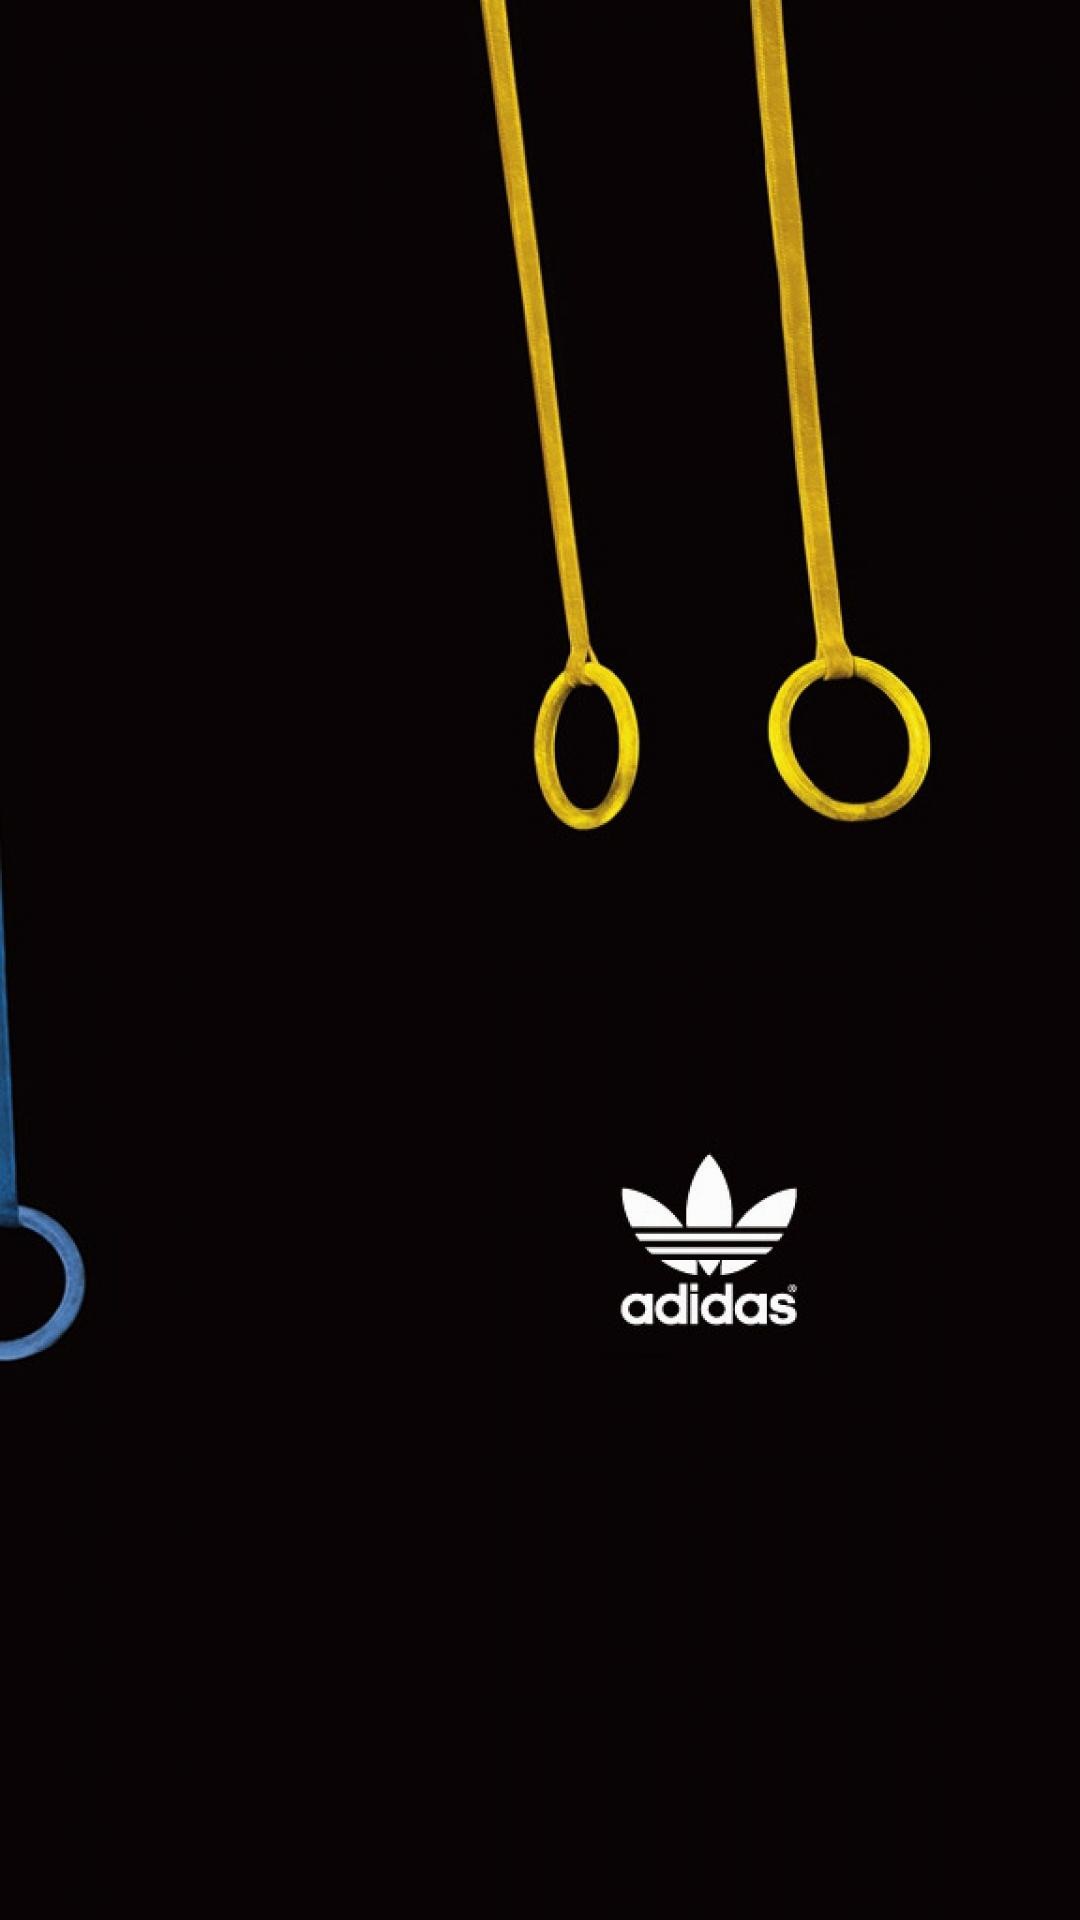 1080x1920 wallpaper.wiki-Adidas-Iphone-Rope-Multicolored-Rings-Sports-